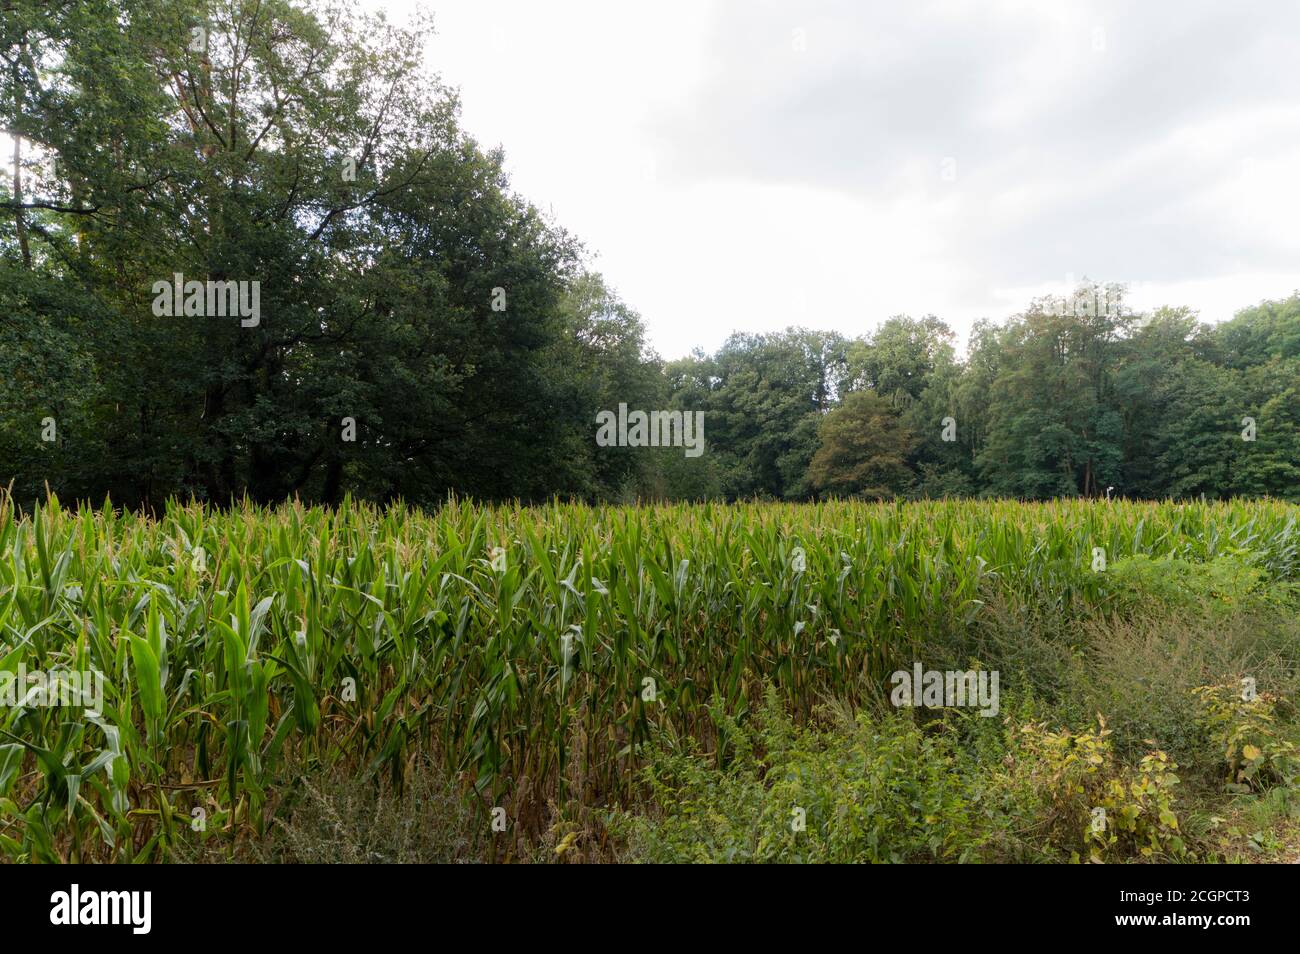 An Agricultural field near Doetinchem, The Netherlands Stock Photo